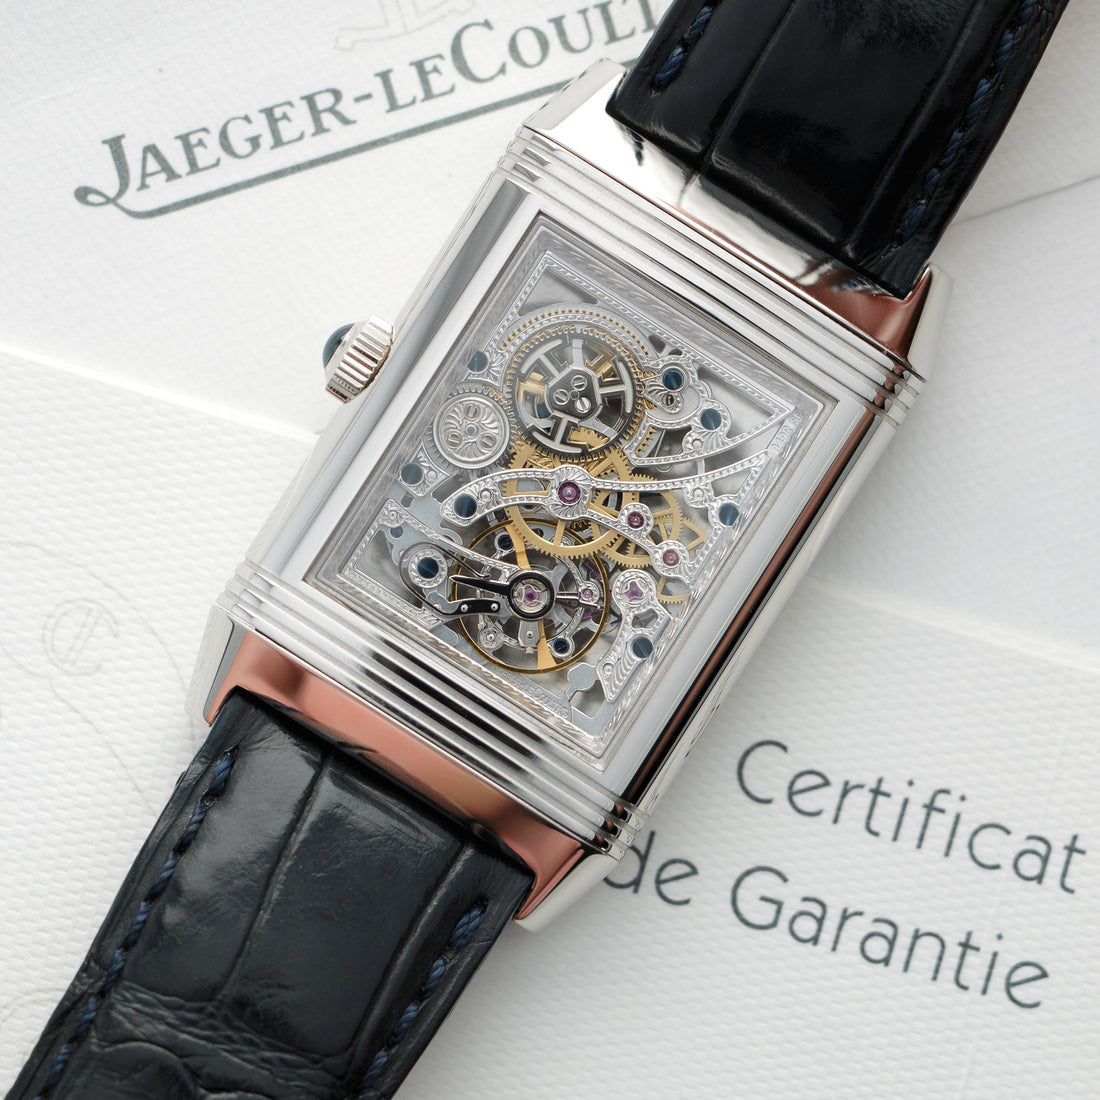 Jaeger Lecoultre Platinum Reverso Number One Skeletonized Watch